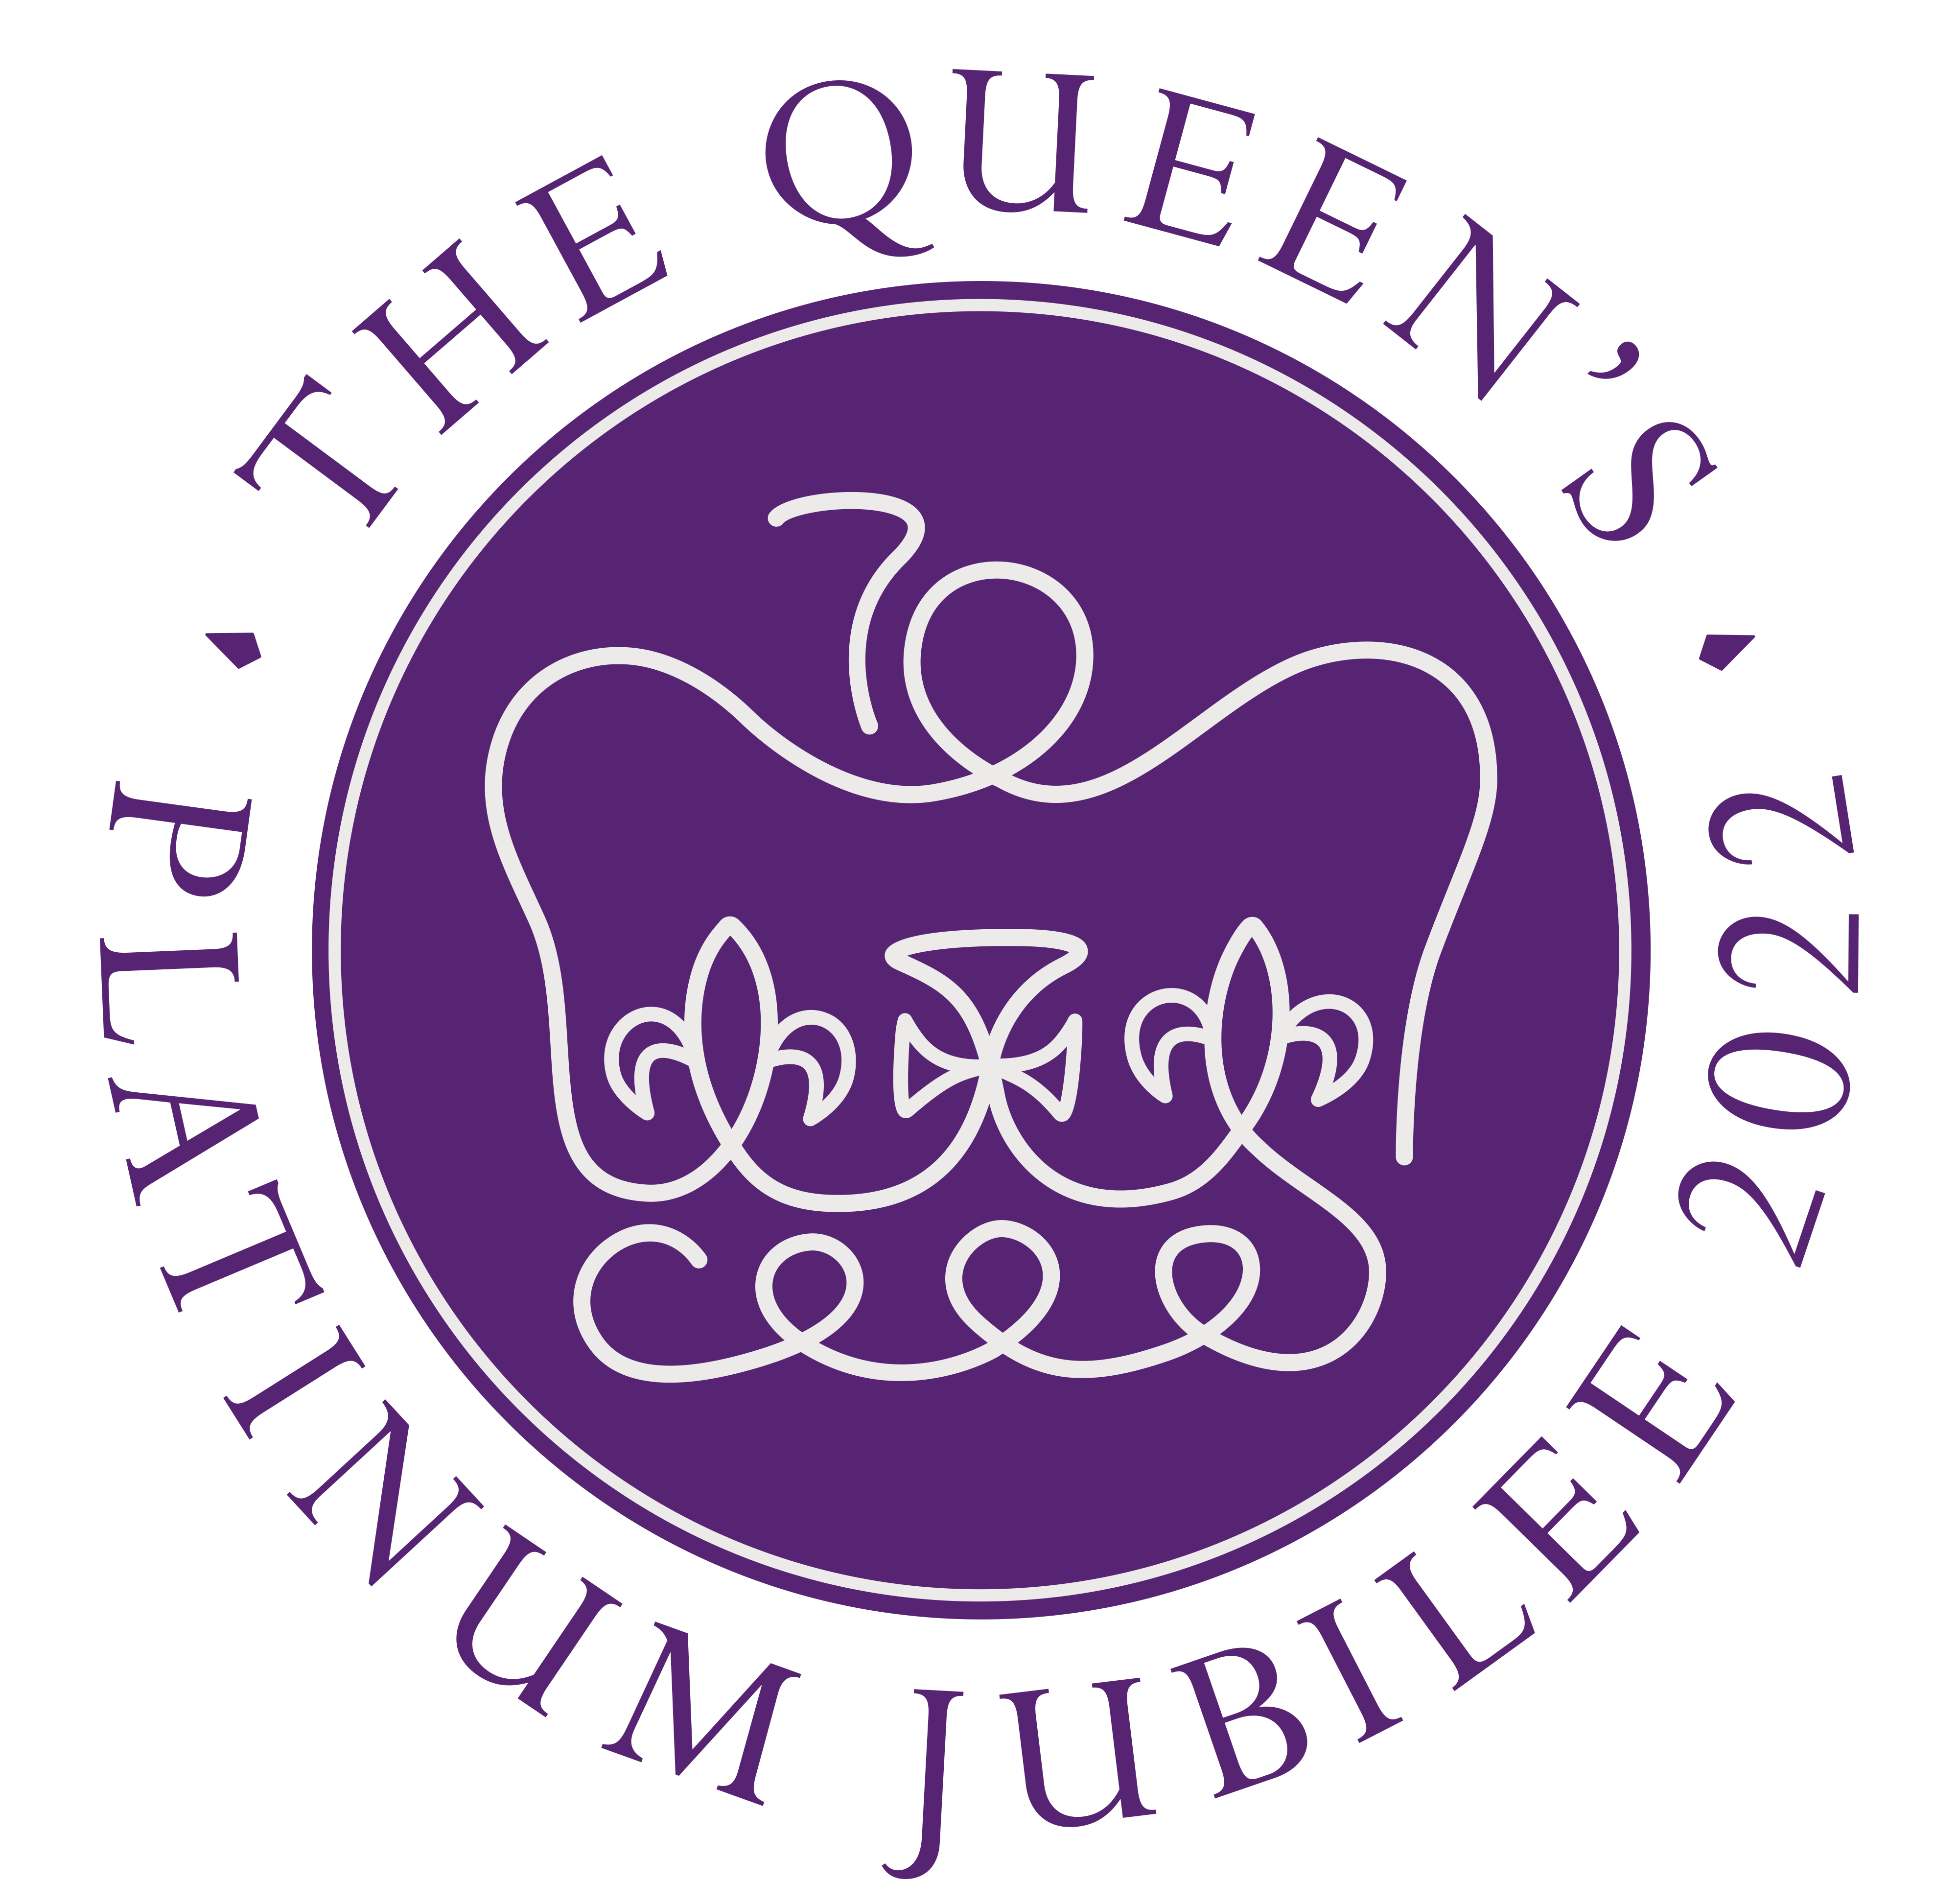 Commemorative coins and support for event organisers to celebrate jubilee